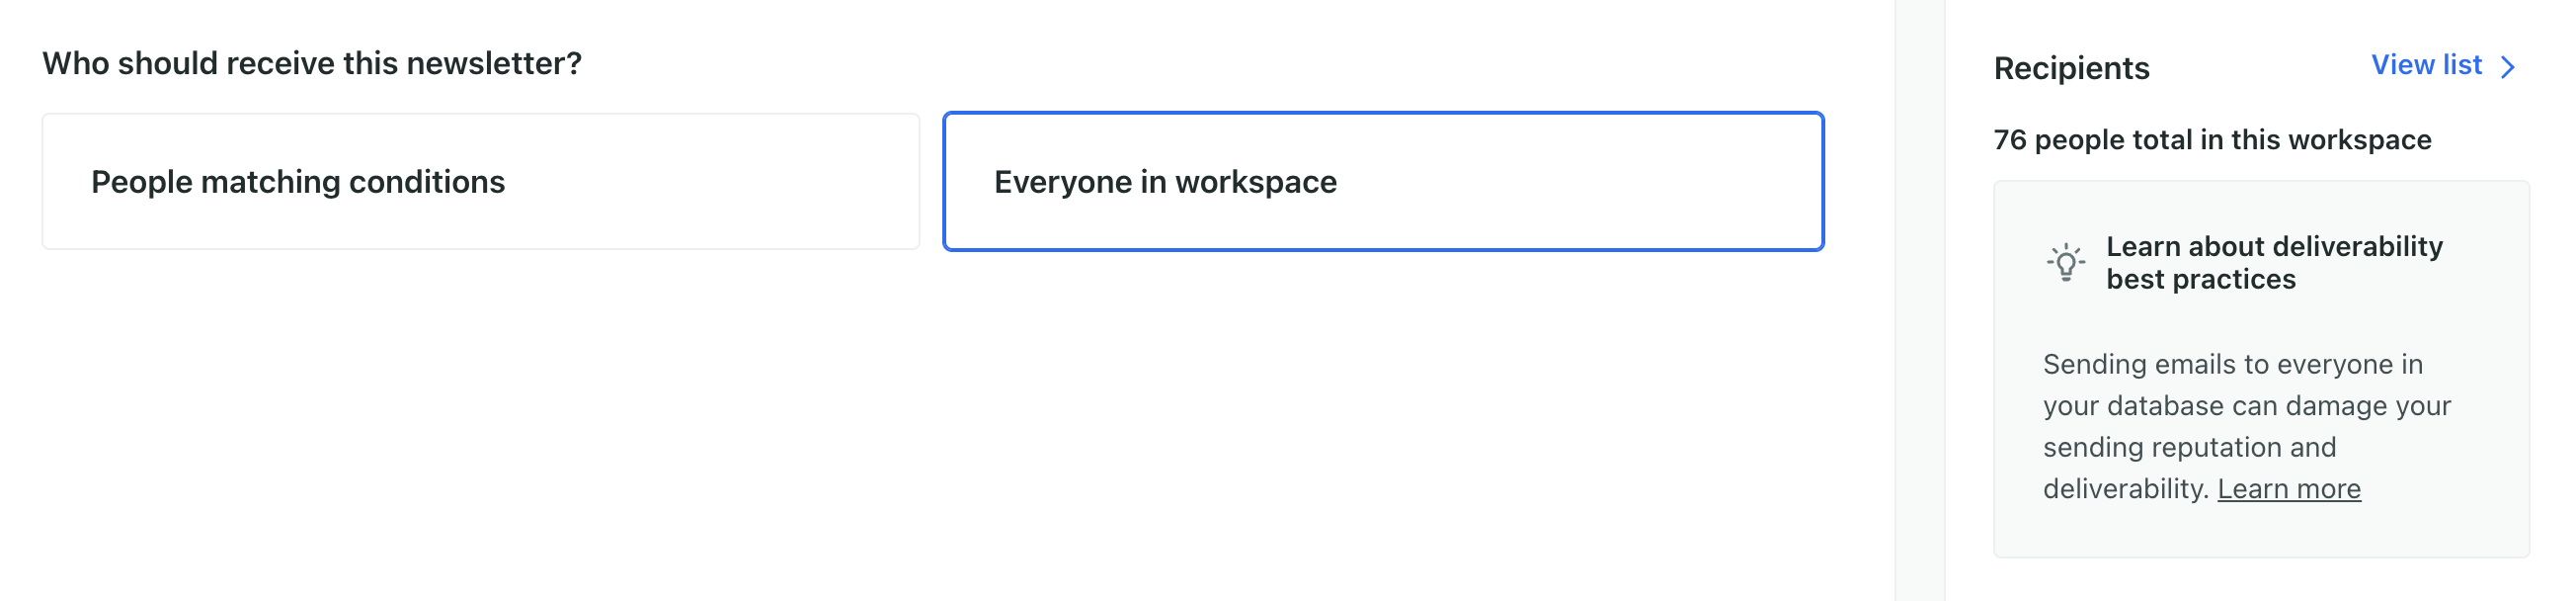 On step 1 of newsletter creation. On the left is the question, who should receive this newsletter. Under that are two options. On the left is the button, People matching conditions. In the middle is, Everyone in workspace. This is selected and highlighted blue. On the right is a panel titled Recipients. It reads, 76 people total in this workspace. In the top right of the panel is a button, View list.